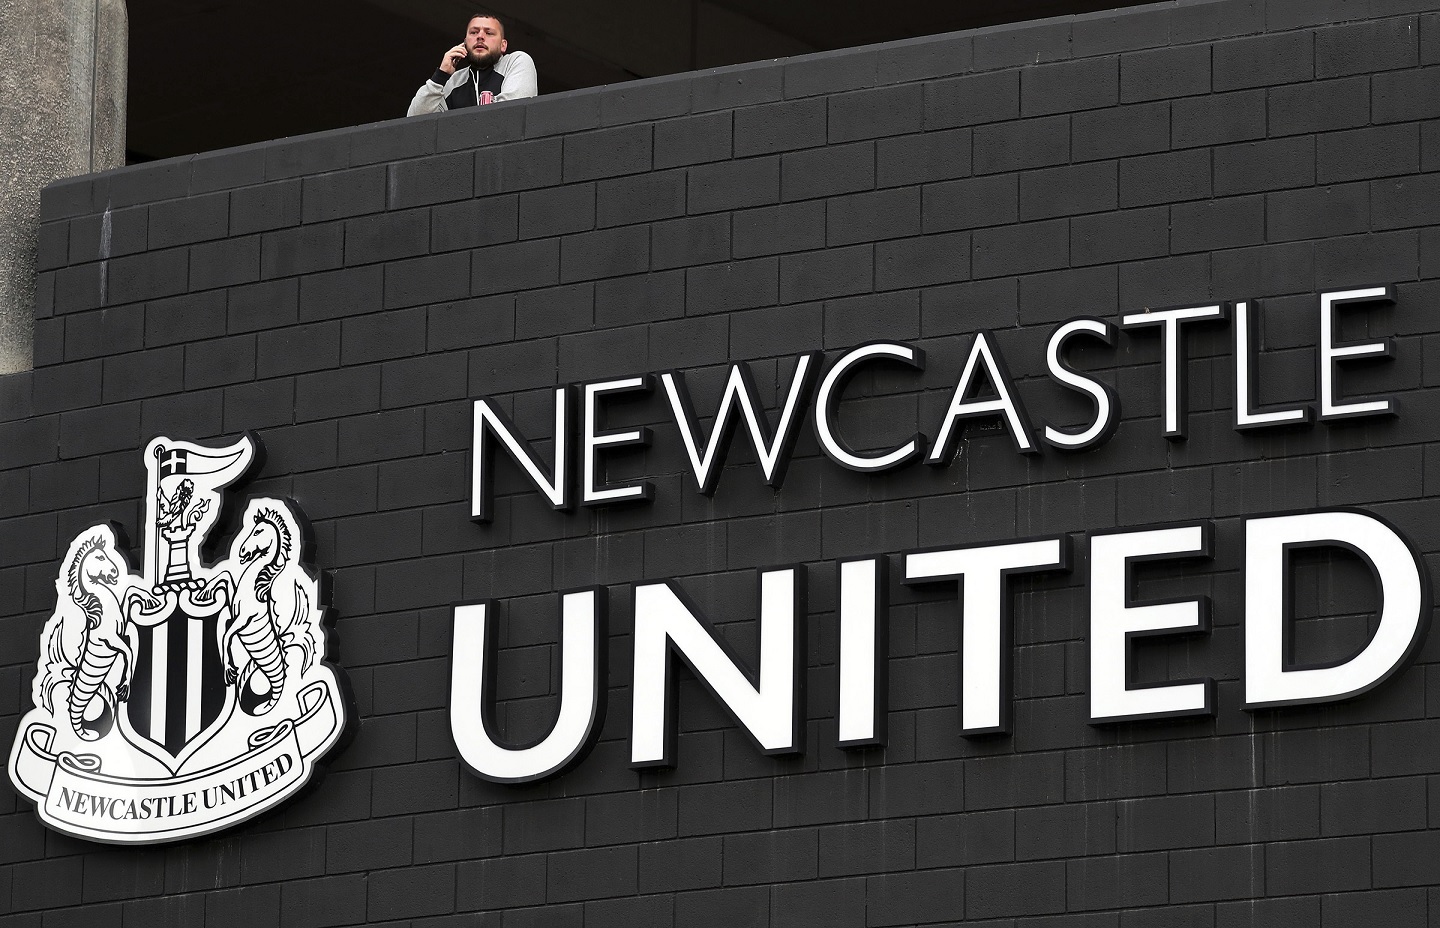 Newcastle-linked 24-year-old midfielder tipped to move this summer